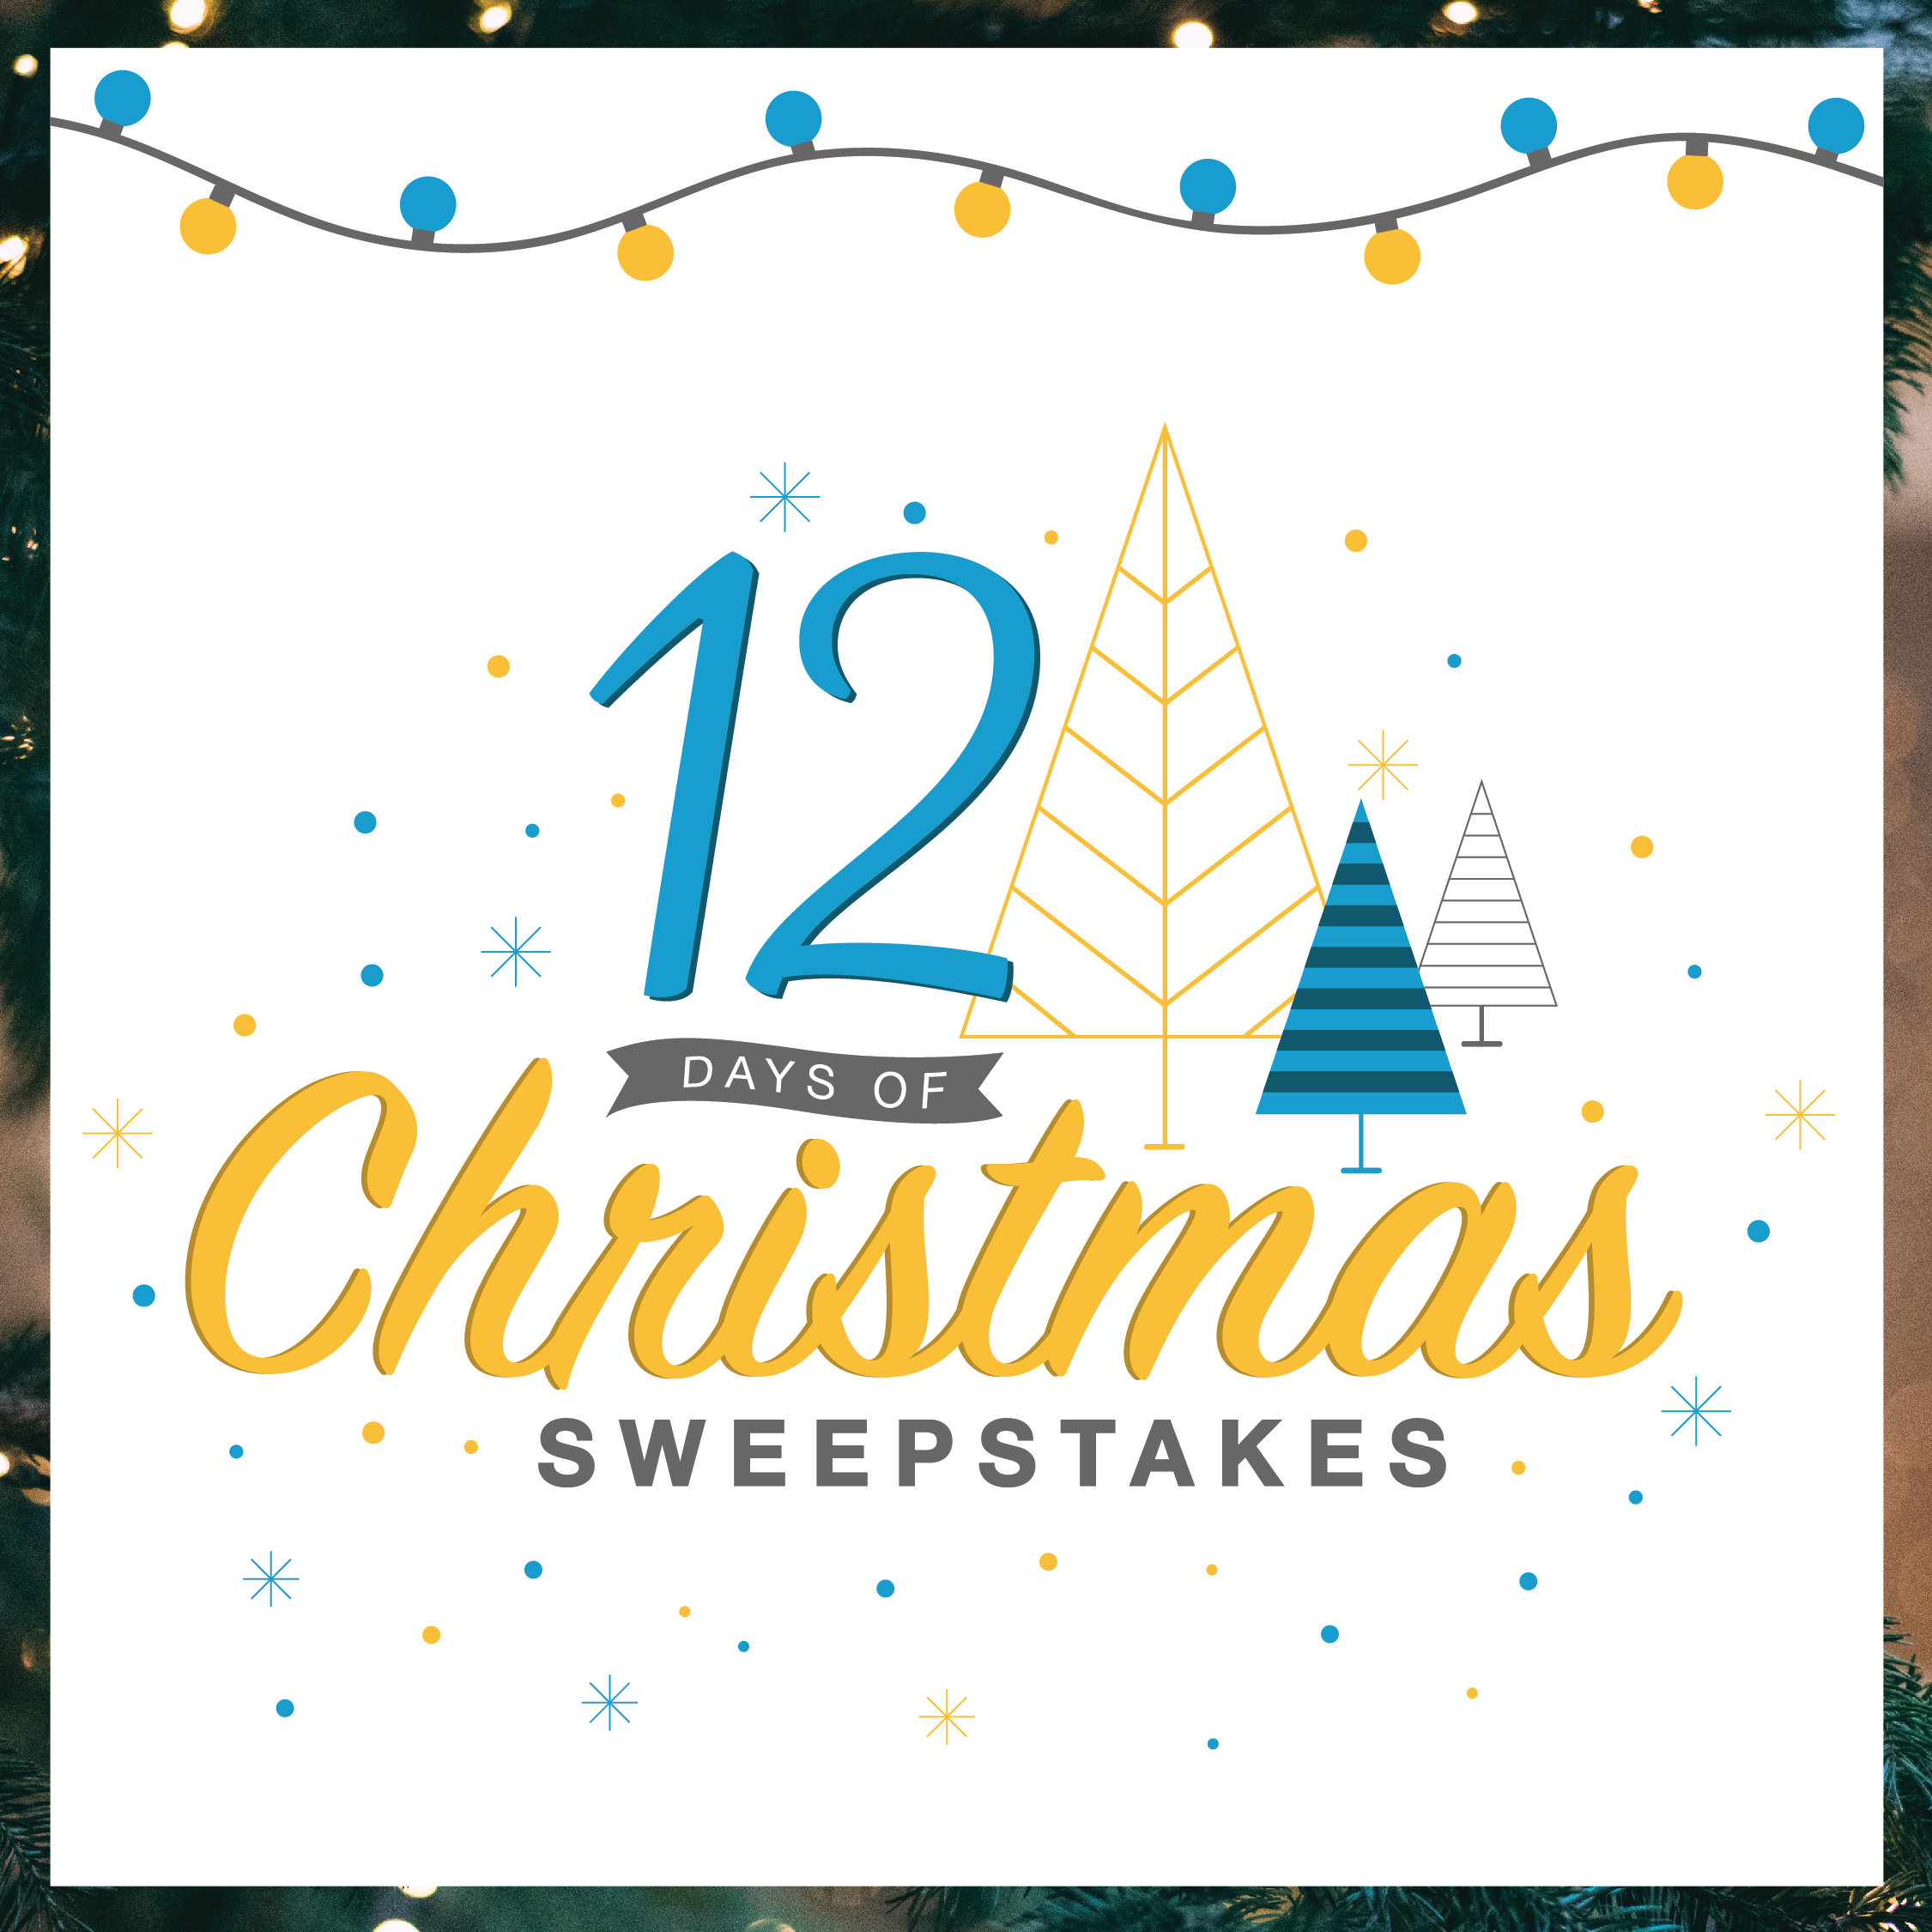 Christmas graphic in white, blue, and yellow that reads "12 DAYS OF Christmas SWEEPSTAKES" with drawn trees and Christmas lights on a white background.